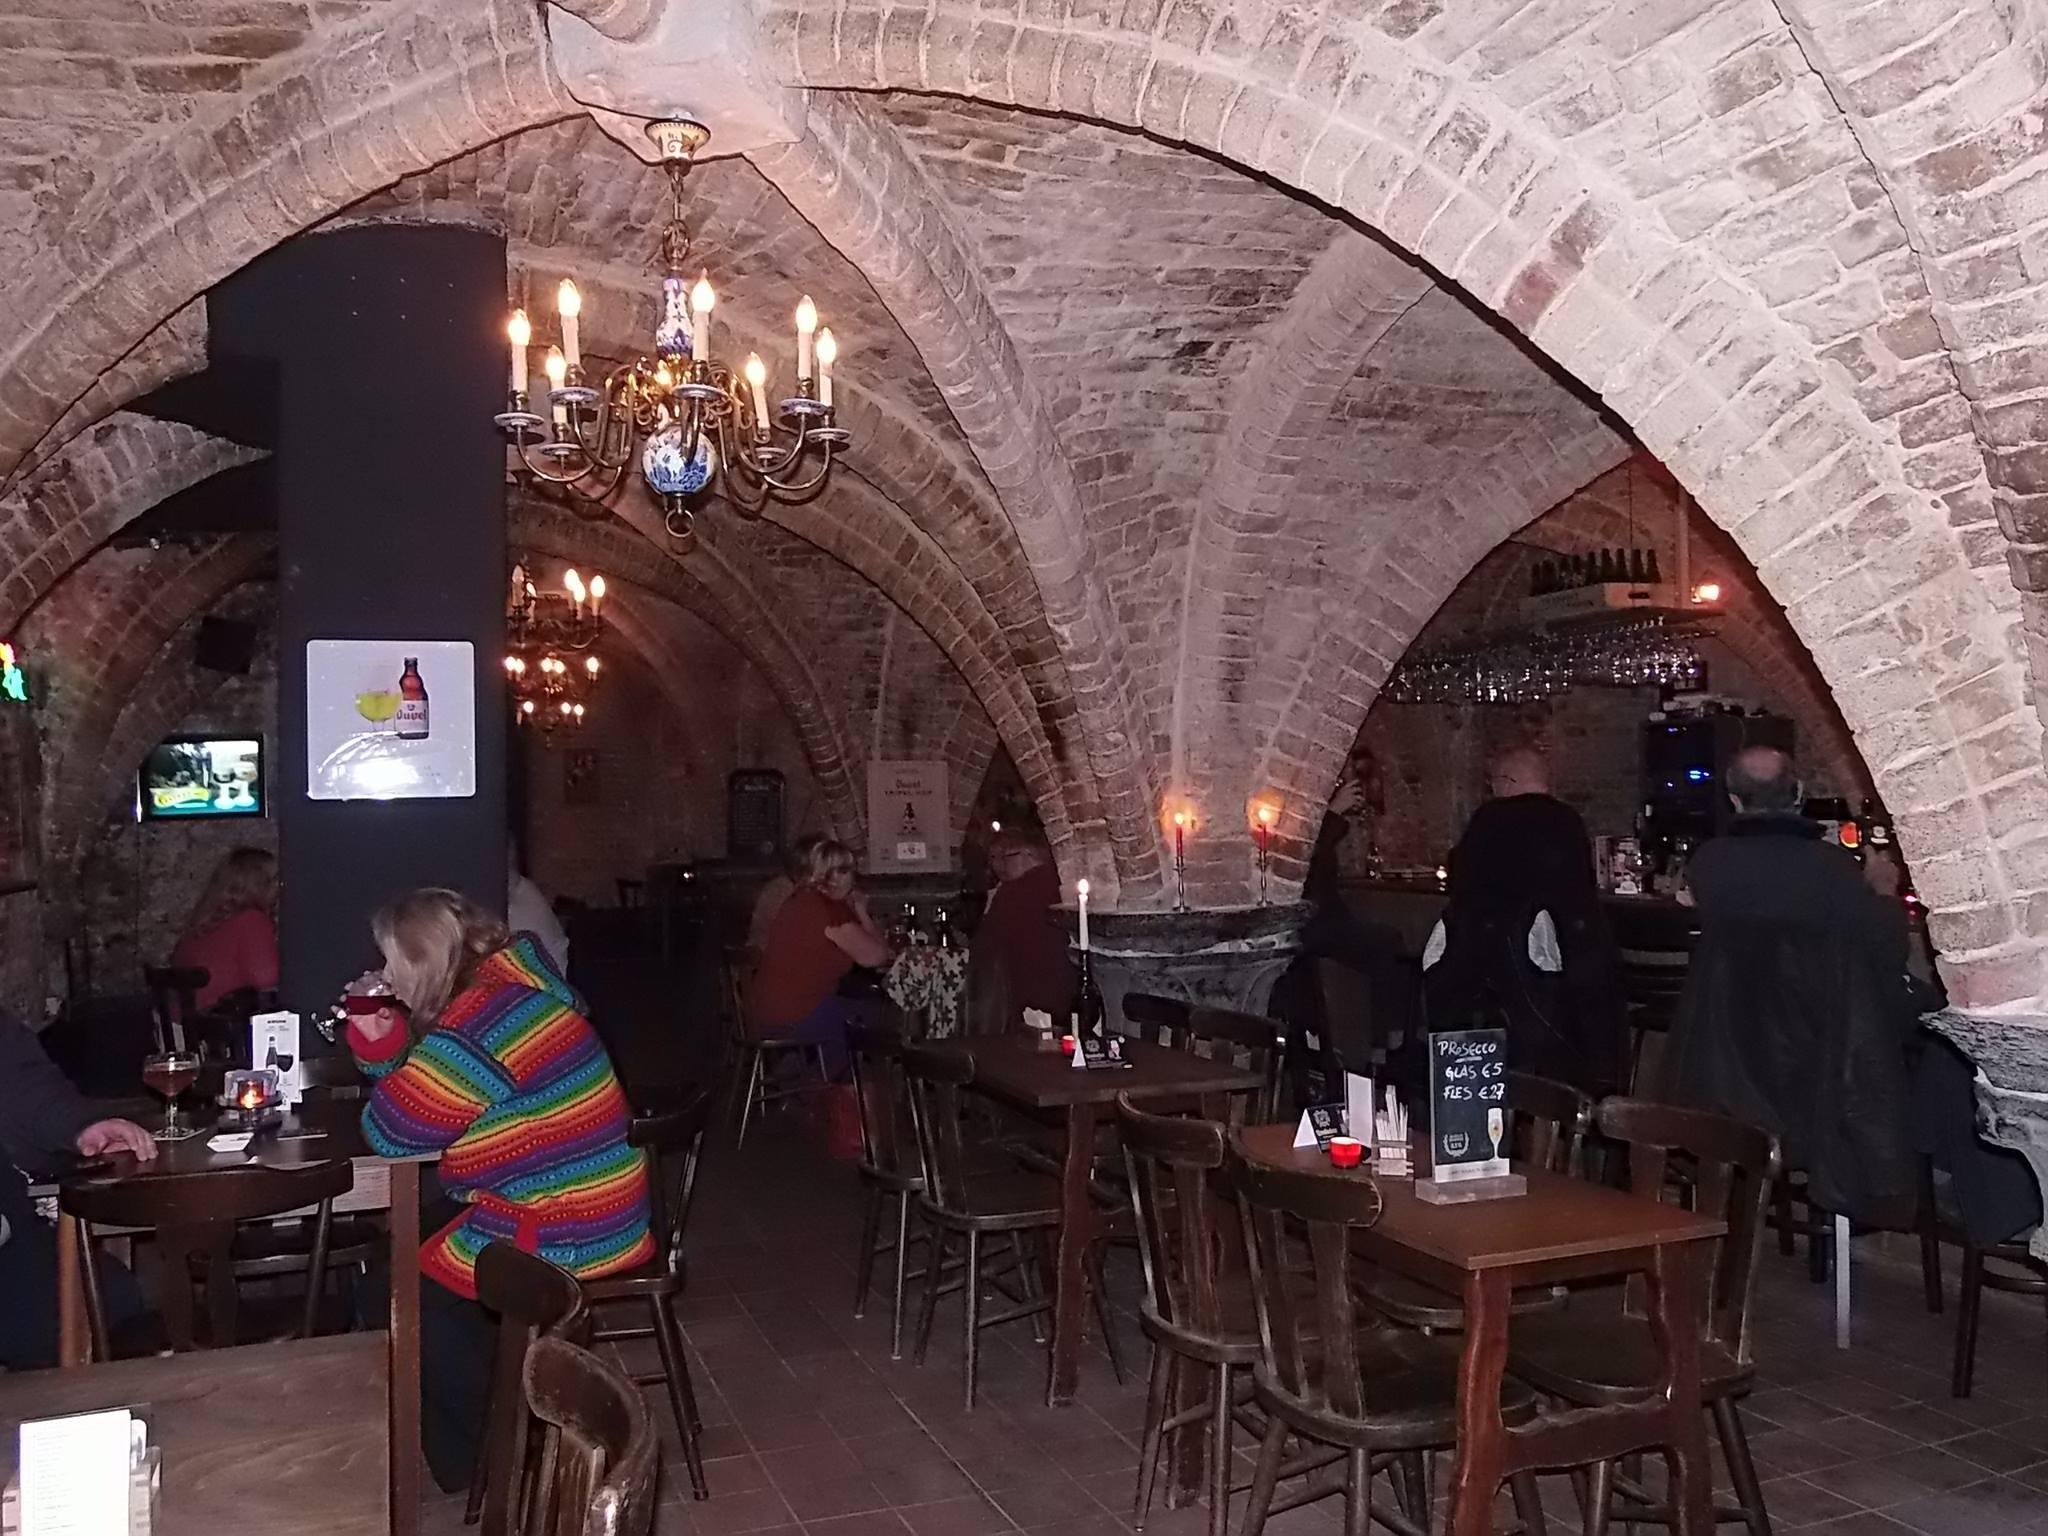 Le Trappiste offers a medieval setting and monk-brewed beer